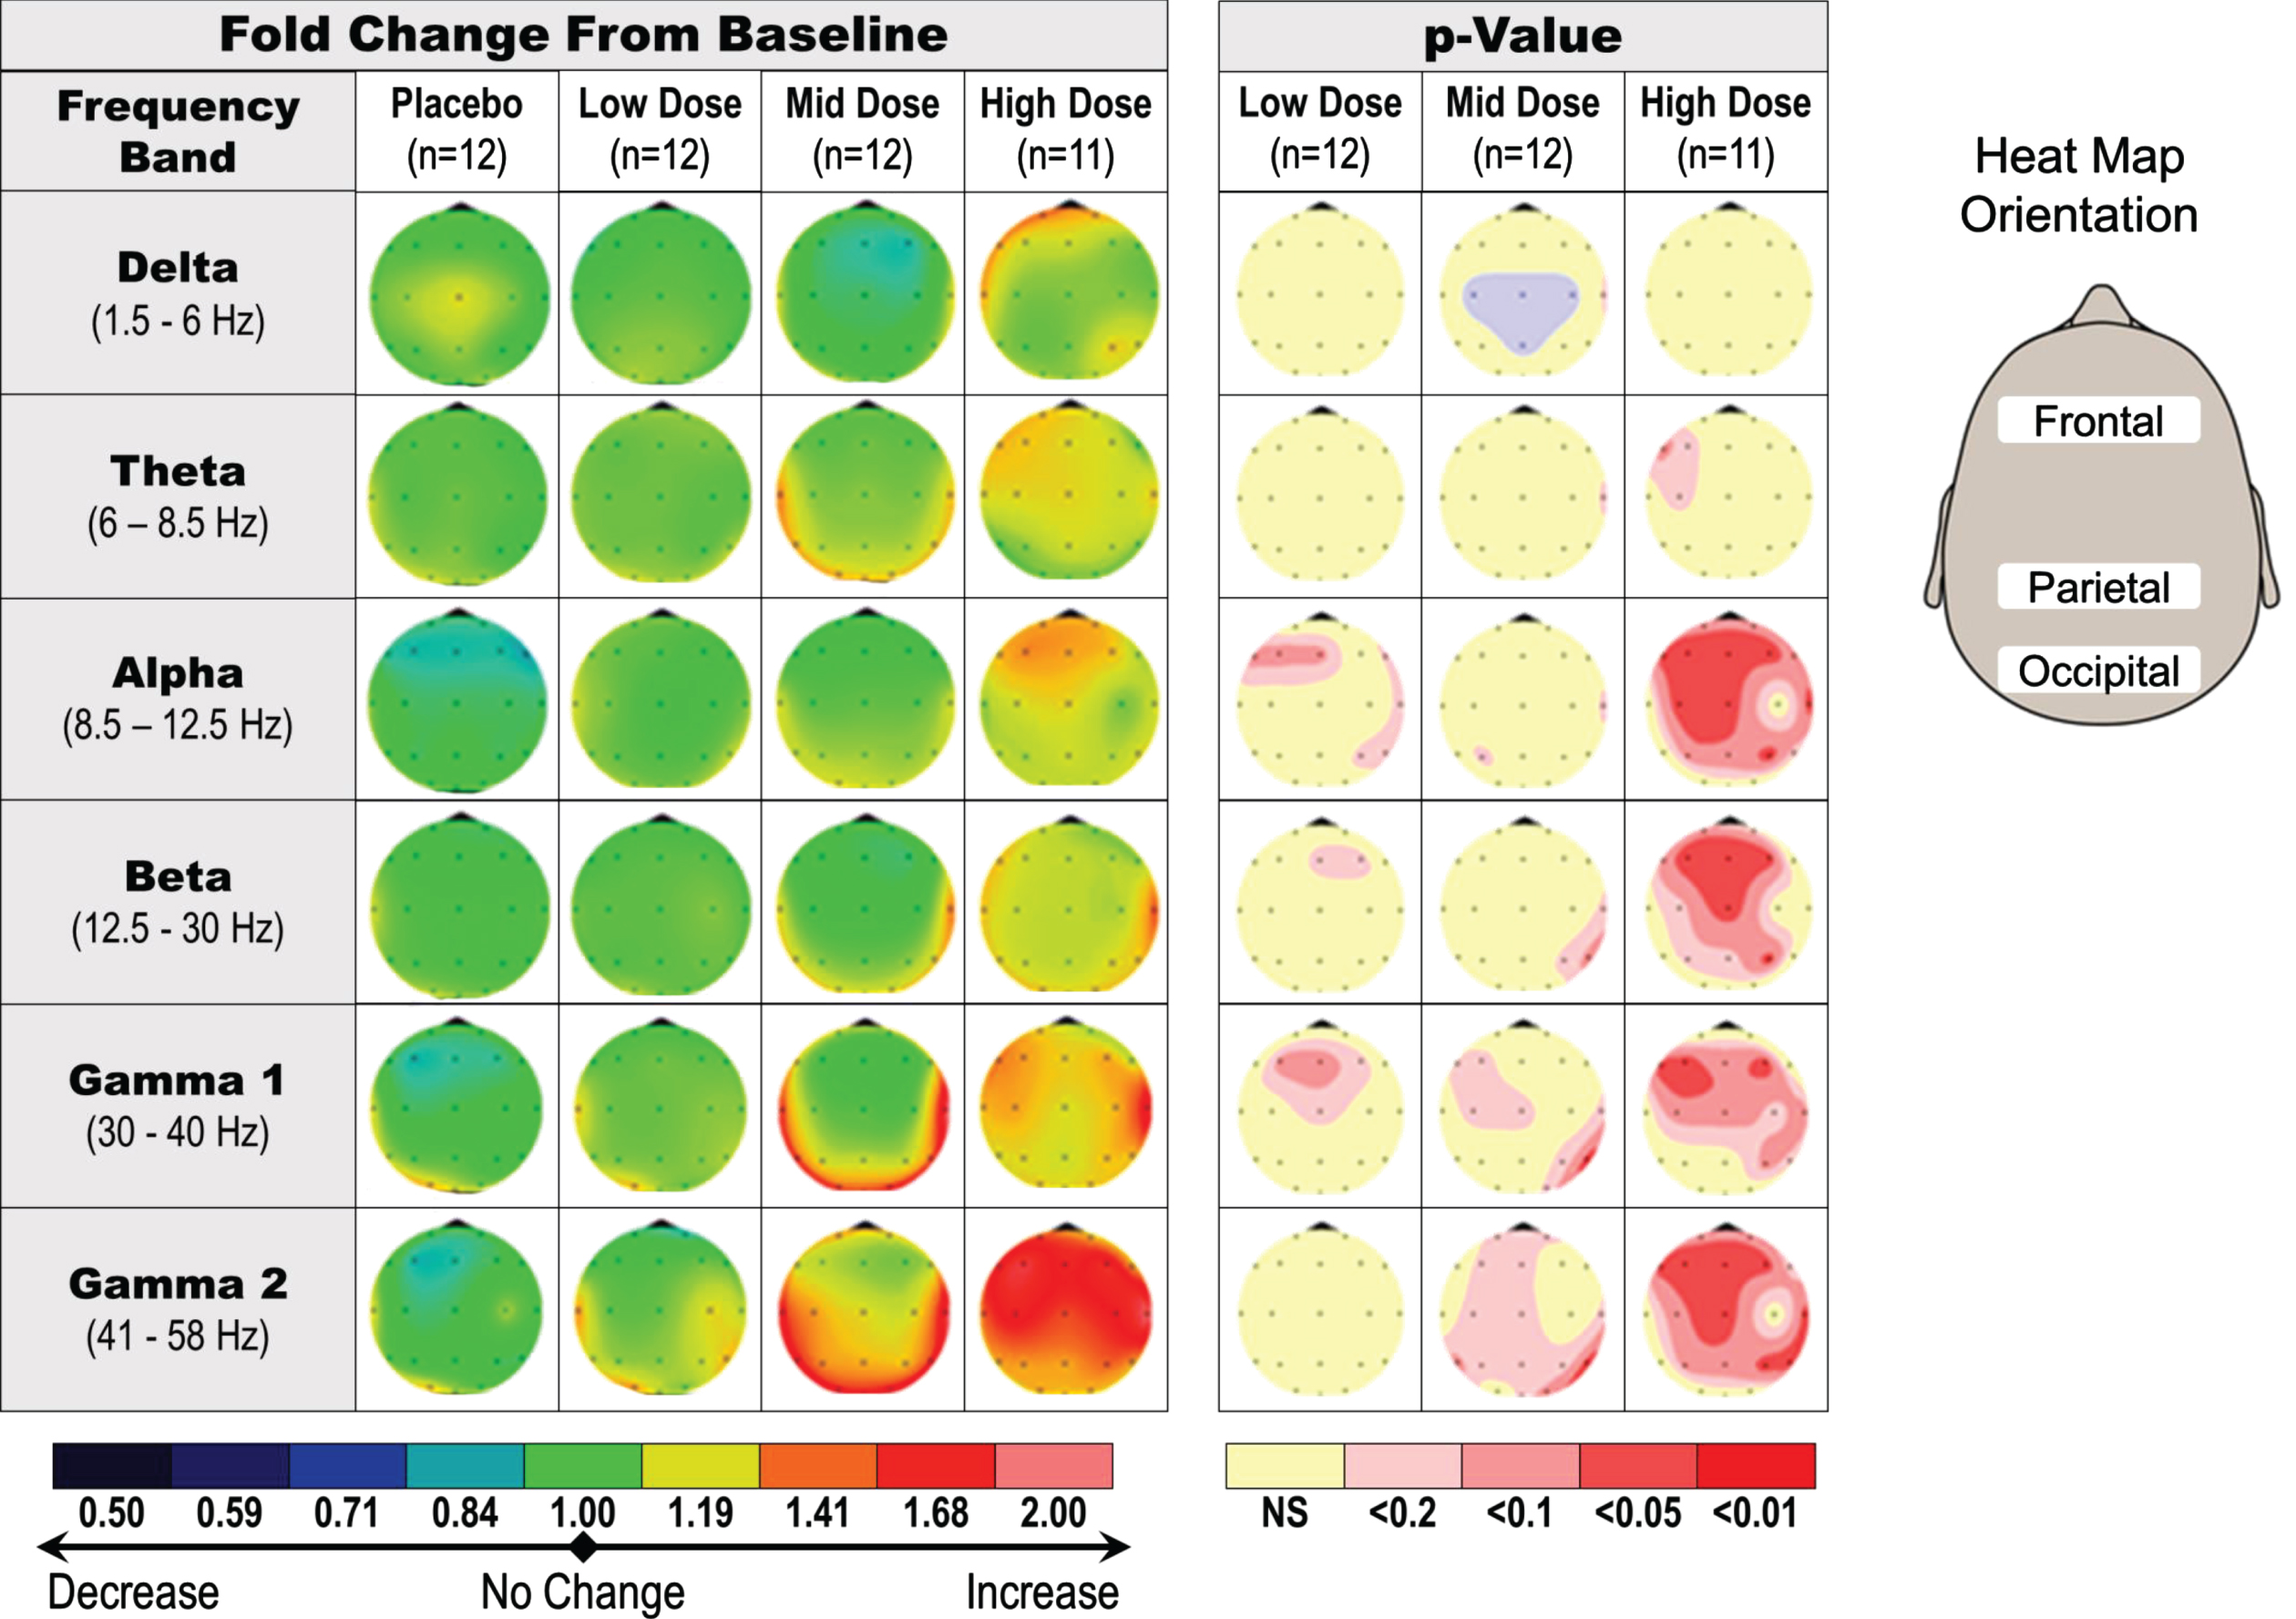 Dose-dependent increase in qEEG gamma induction in healthy young subjects receiving a single dose of fosgonimeton. SAD qEEG results illustrate the average change in absolute qEEG power from predose (baseline) to postdose, or the baseline ratio, for pooled placebo group, low doses (2 and 6 mg), middle doses (20 and 40 mg), and high doses (60 and 90 mg). Heat maps illustrate the average change in absolute qEEG power following administration of fosgonimeton (left) and associated p values from ANCOVA analysis (right; not corrected for multiple comparisons). ANCOVA, analysis of covariance; SAD, single ascending dose; qEEG, quantitative electroencephalogram.